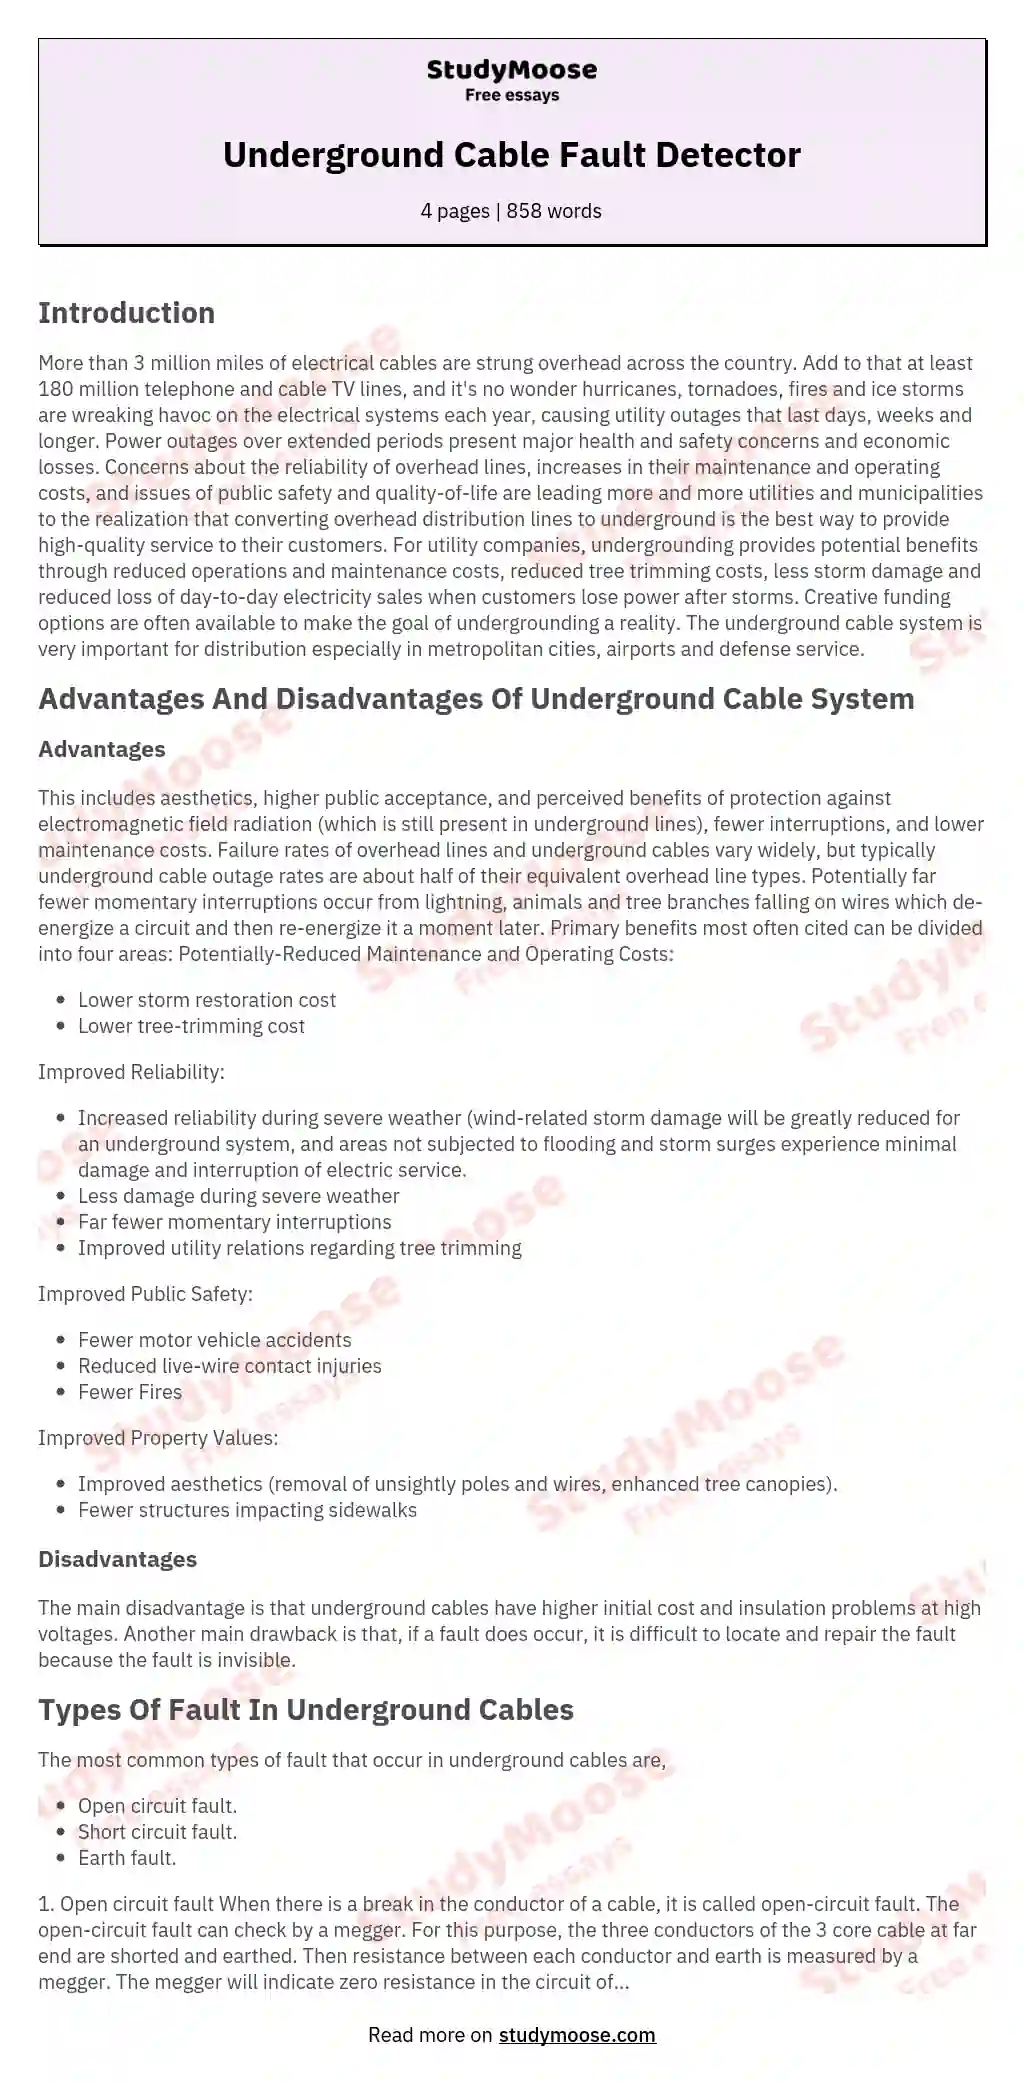 Underground Cable Fault Detector essay